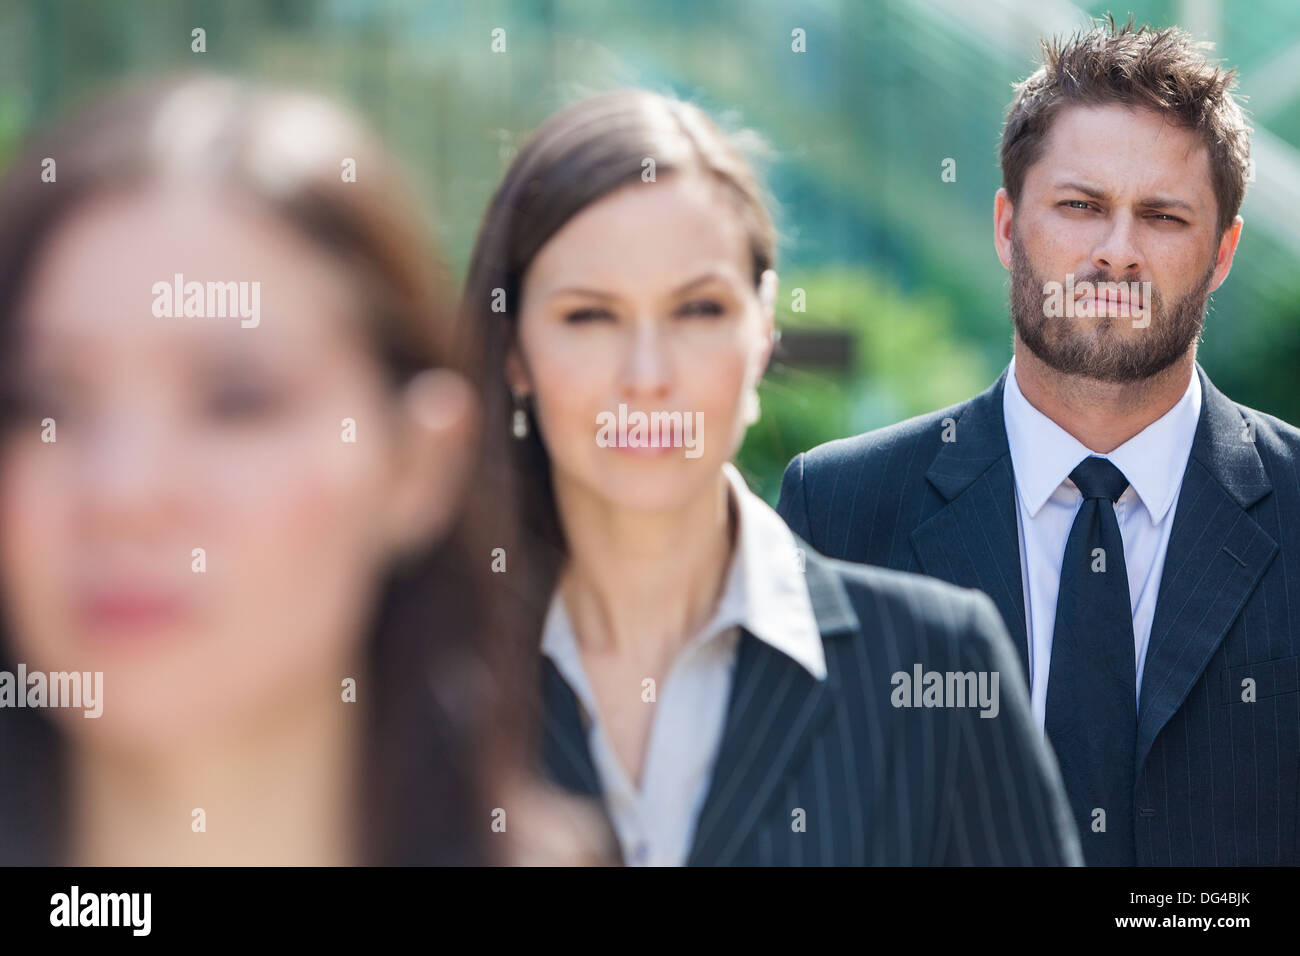 A young businessman business man with beard waiting behind two businesswomen in line Stock Photo